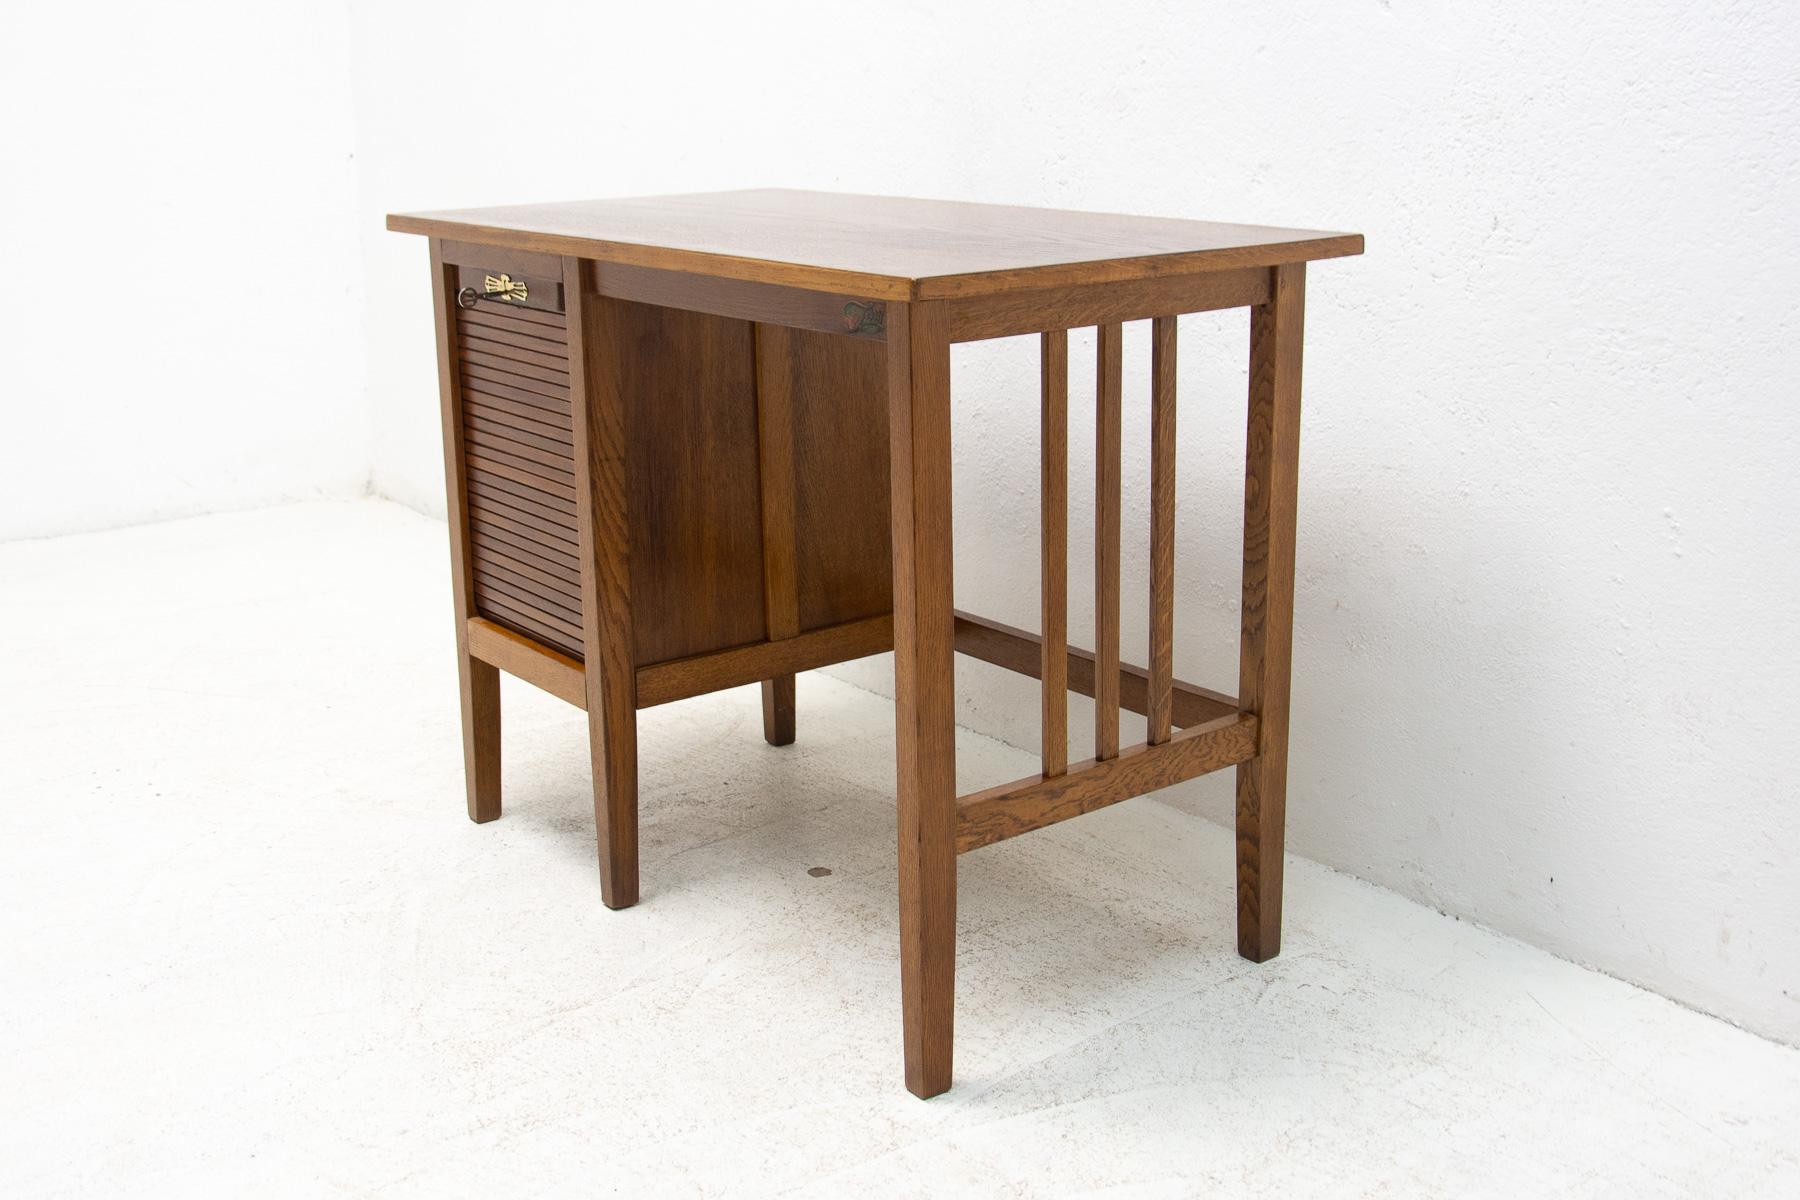 This so-called “American” roller blind desk was made in Bohemia by Jerry company in the 1930s. It is made of stained oak wood. This is one of the most interesting variants of this table.
Completely renovated, in excelent condition.

Measures: